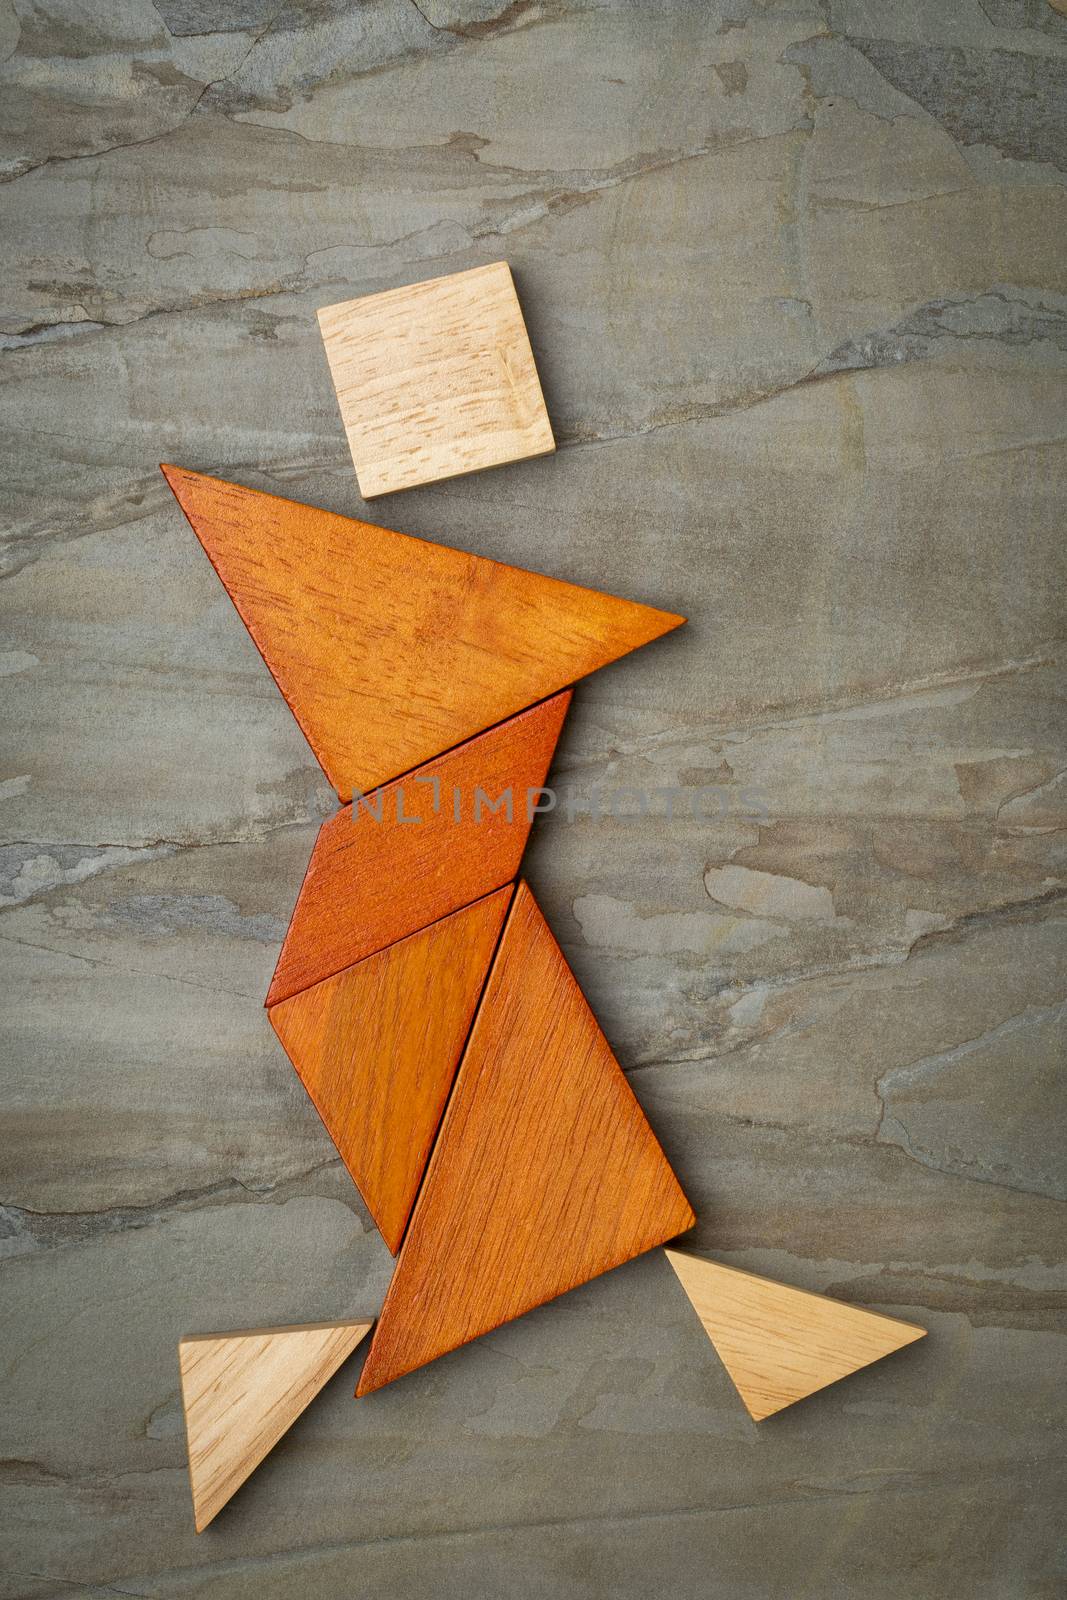 abstract figure of a female dancer built from seven tangram wooden pieces, a traditional Chinese puzzle game; slate rock background background, the artwork copyright by the photographer